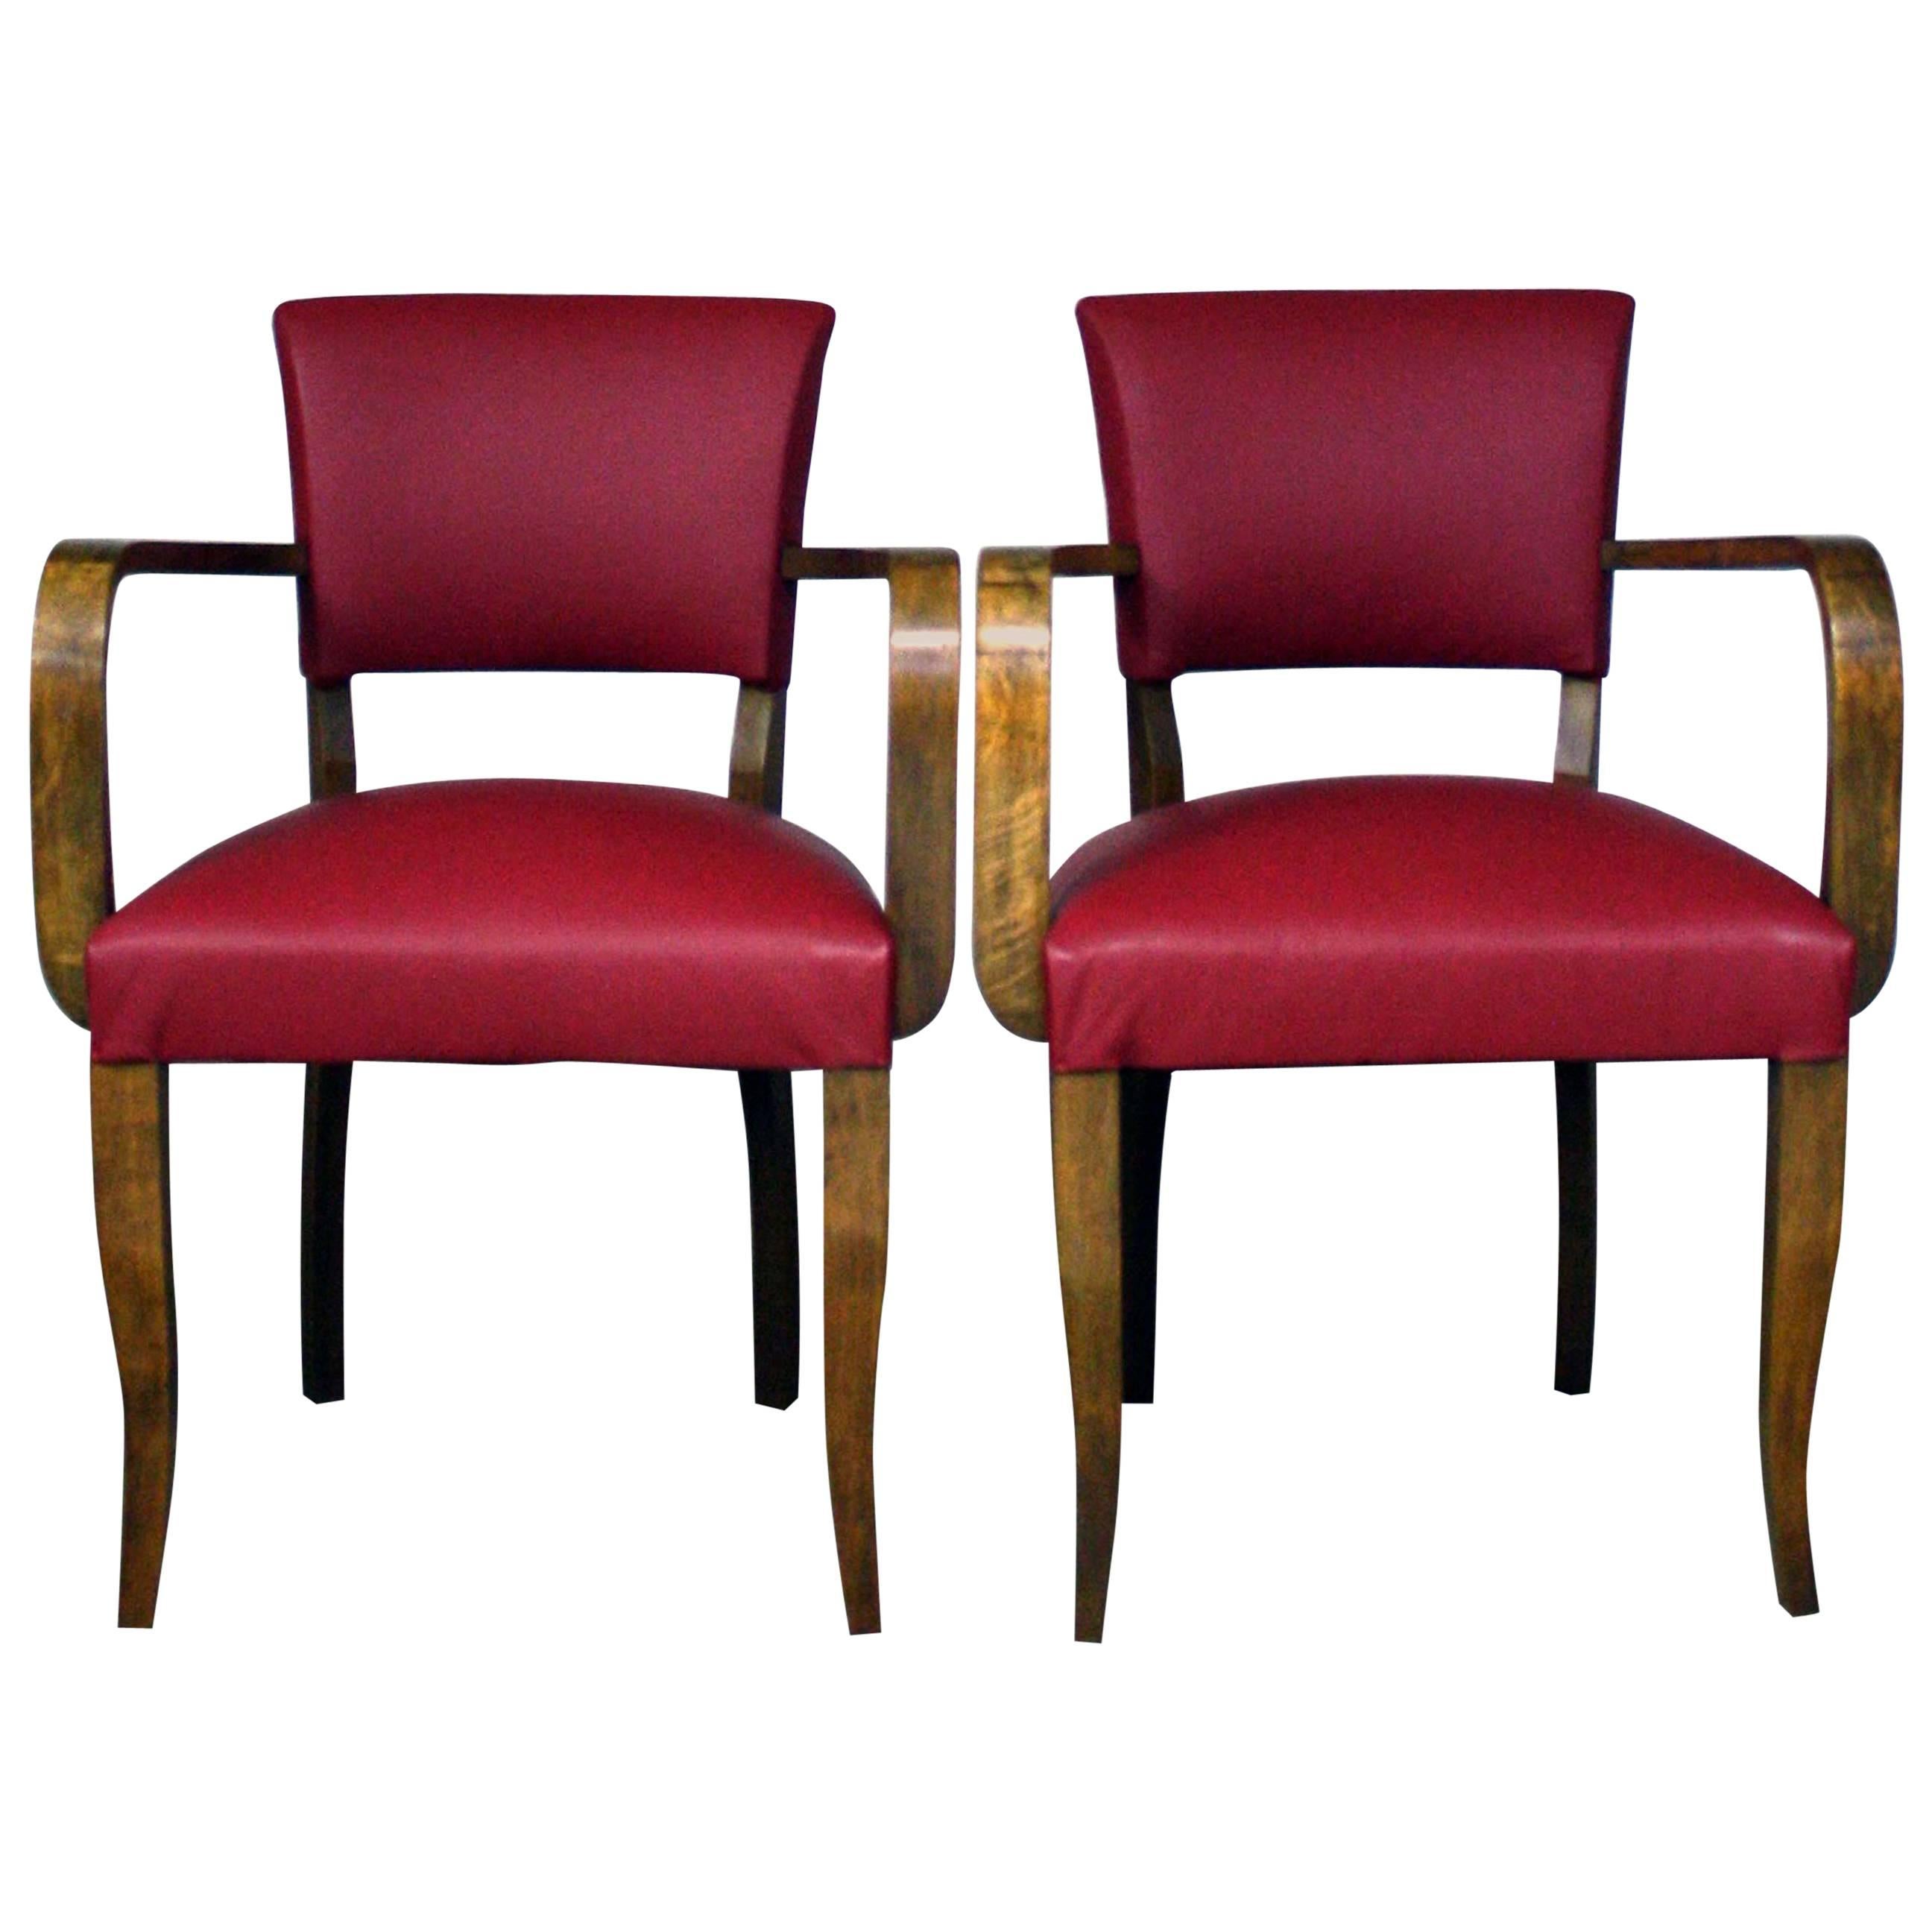 1930s Reupholstered Leather Bridge Chairs